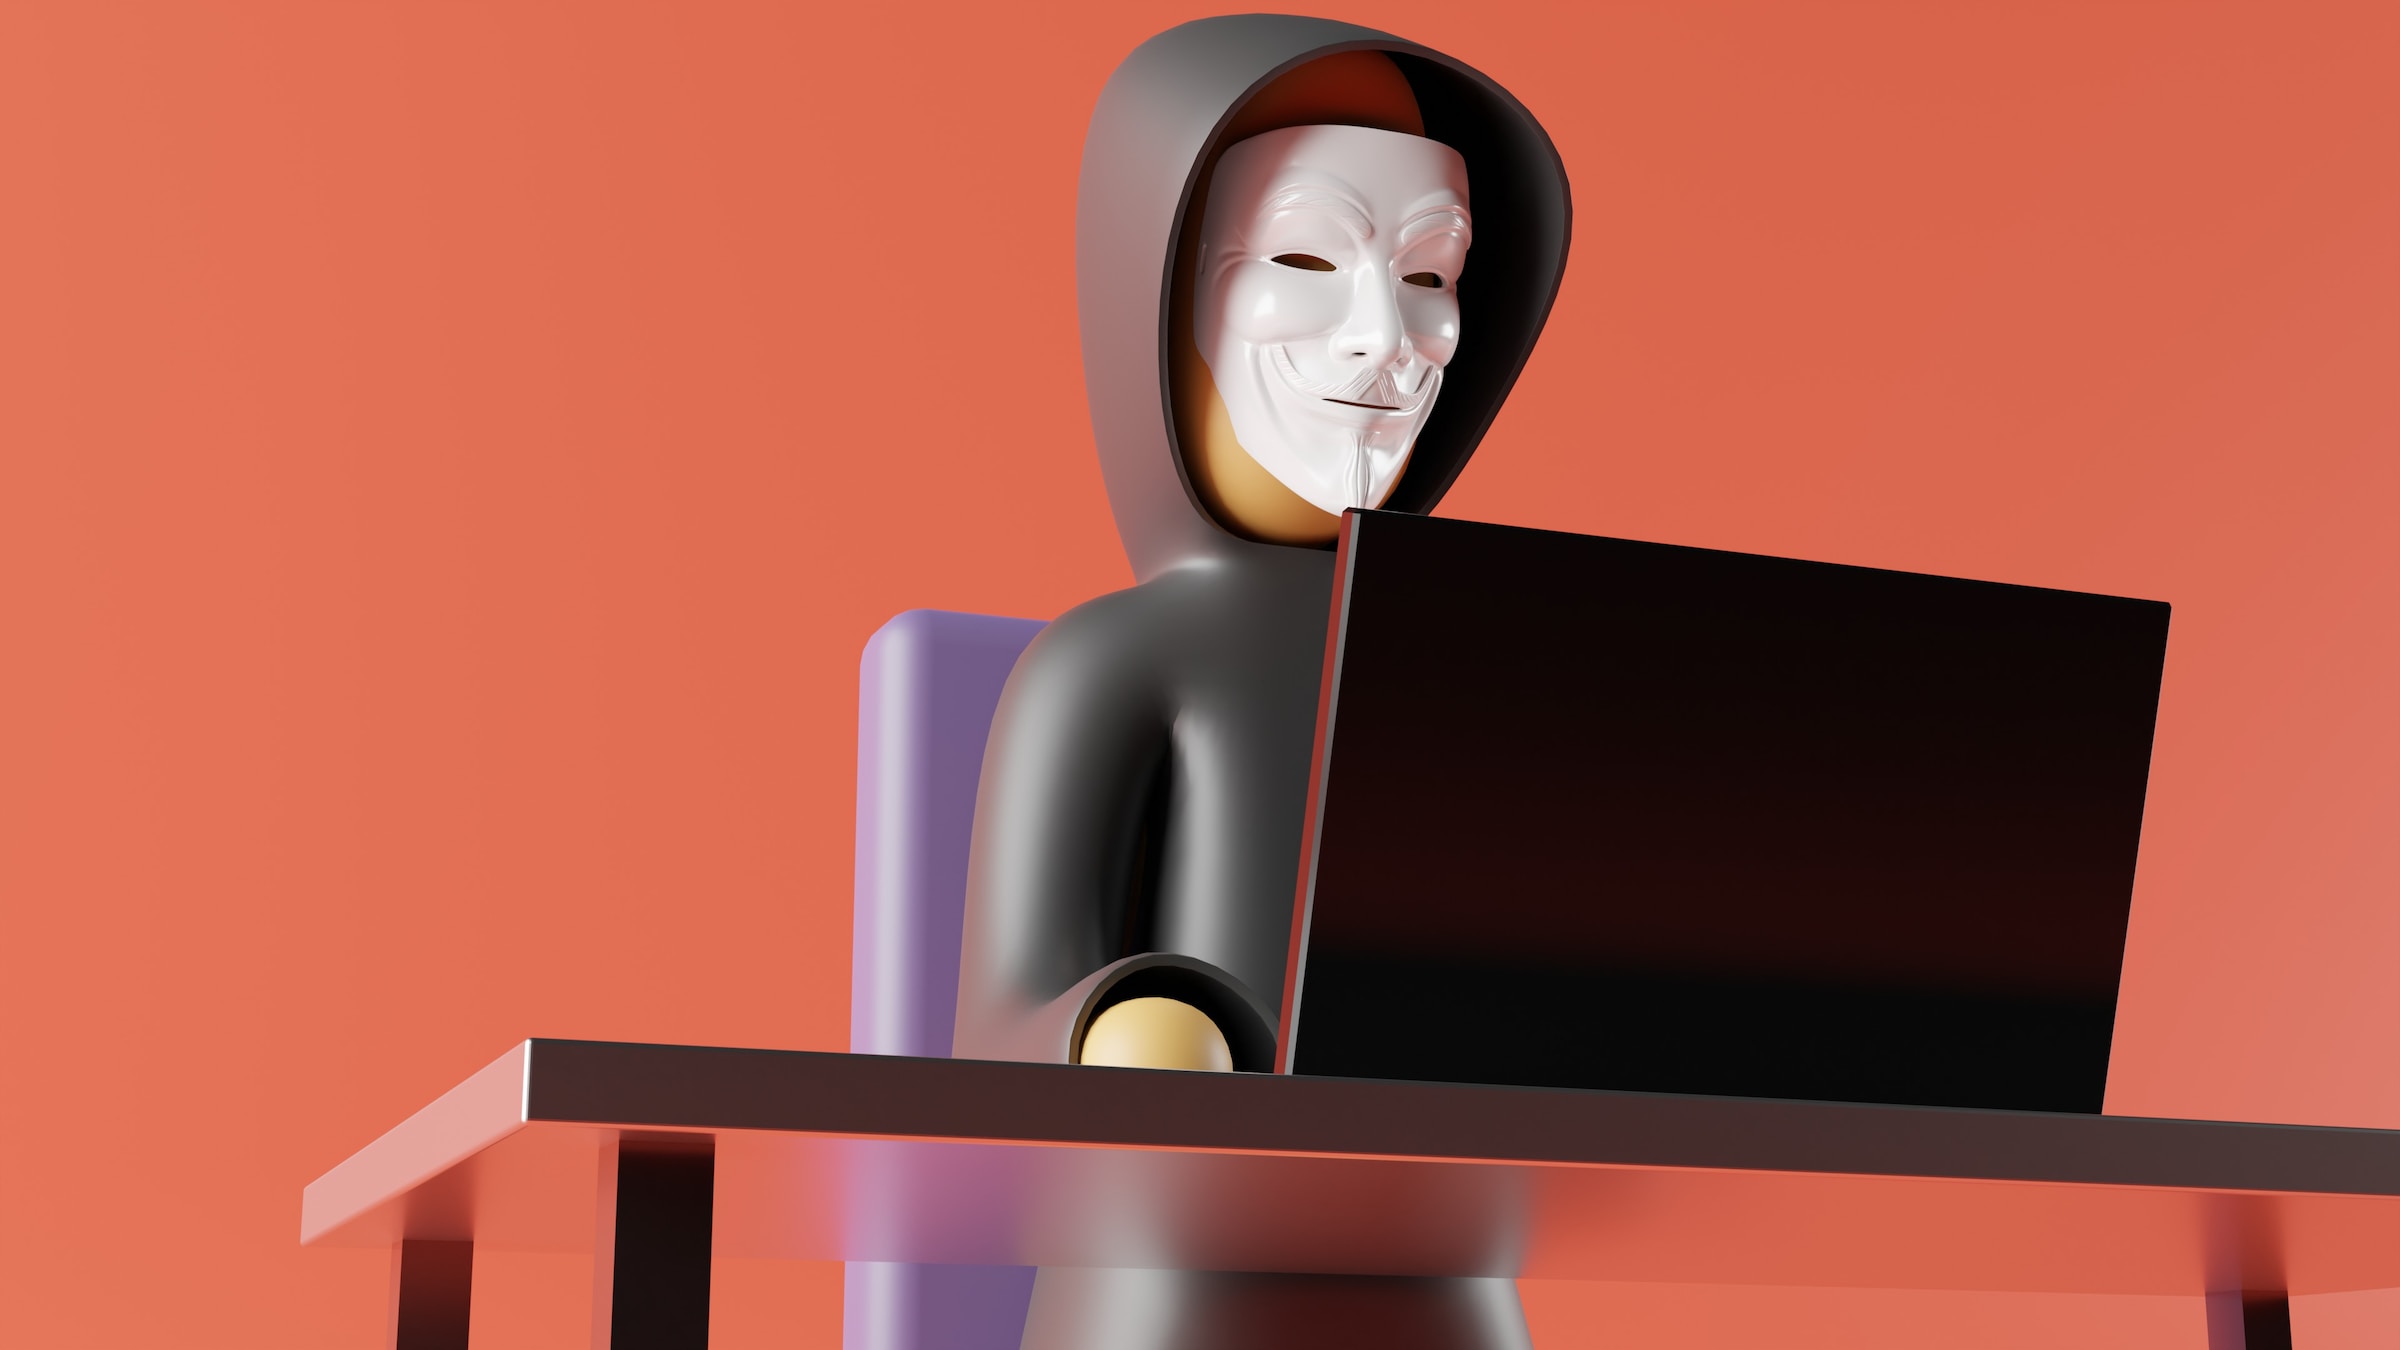 animated picture of hacker with mask sitting behind a laptop